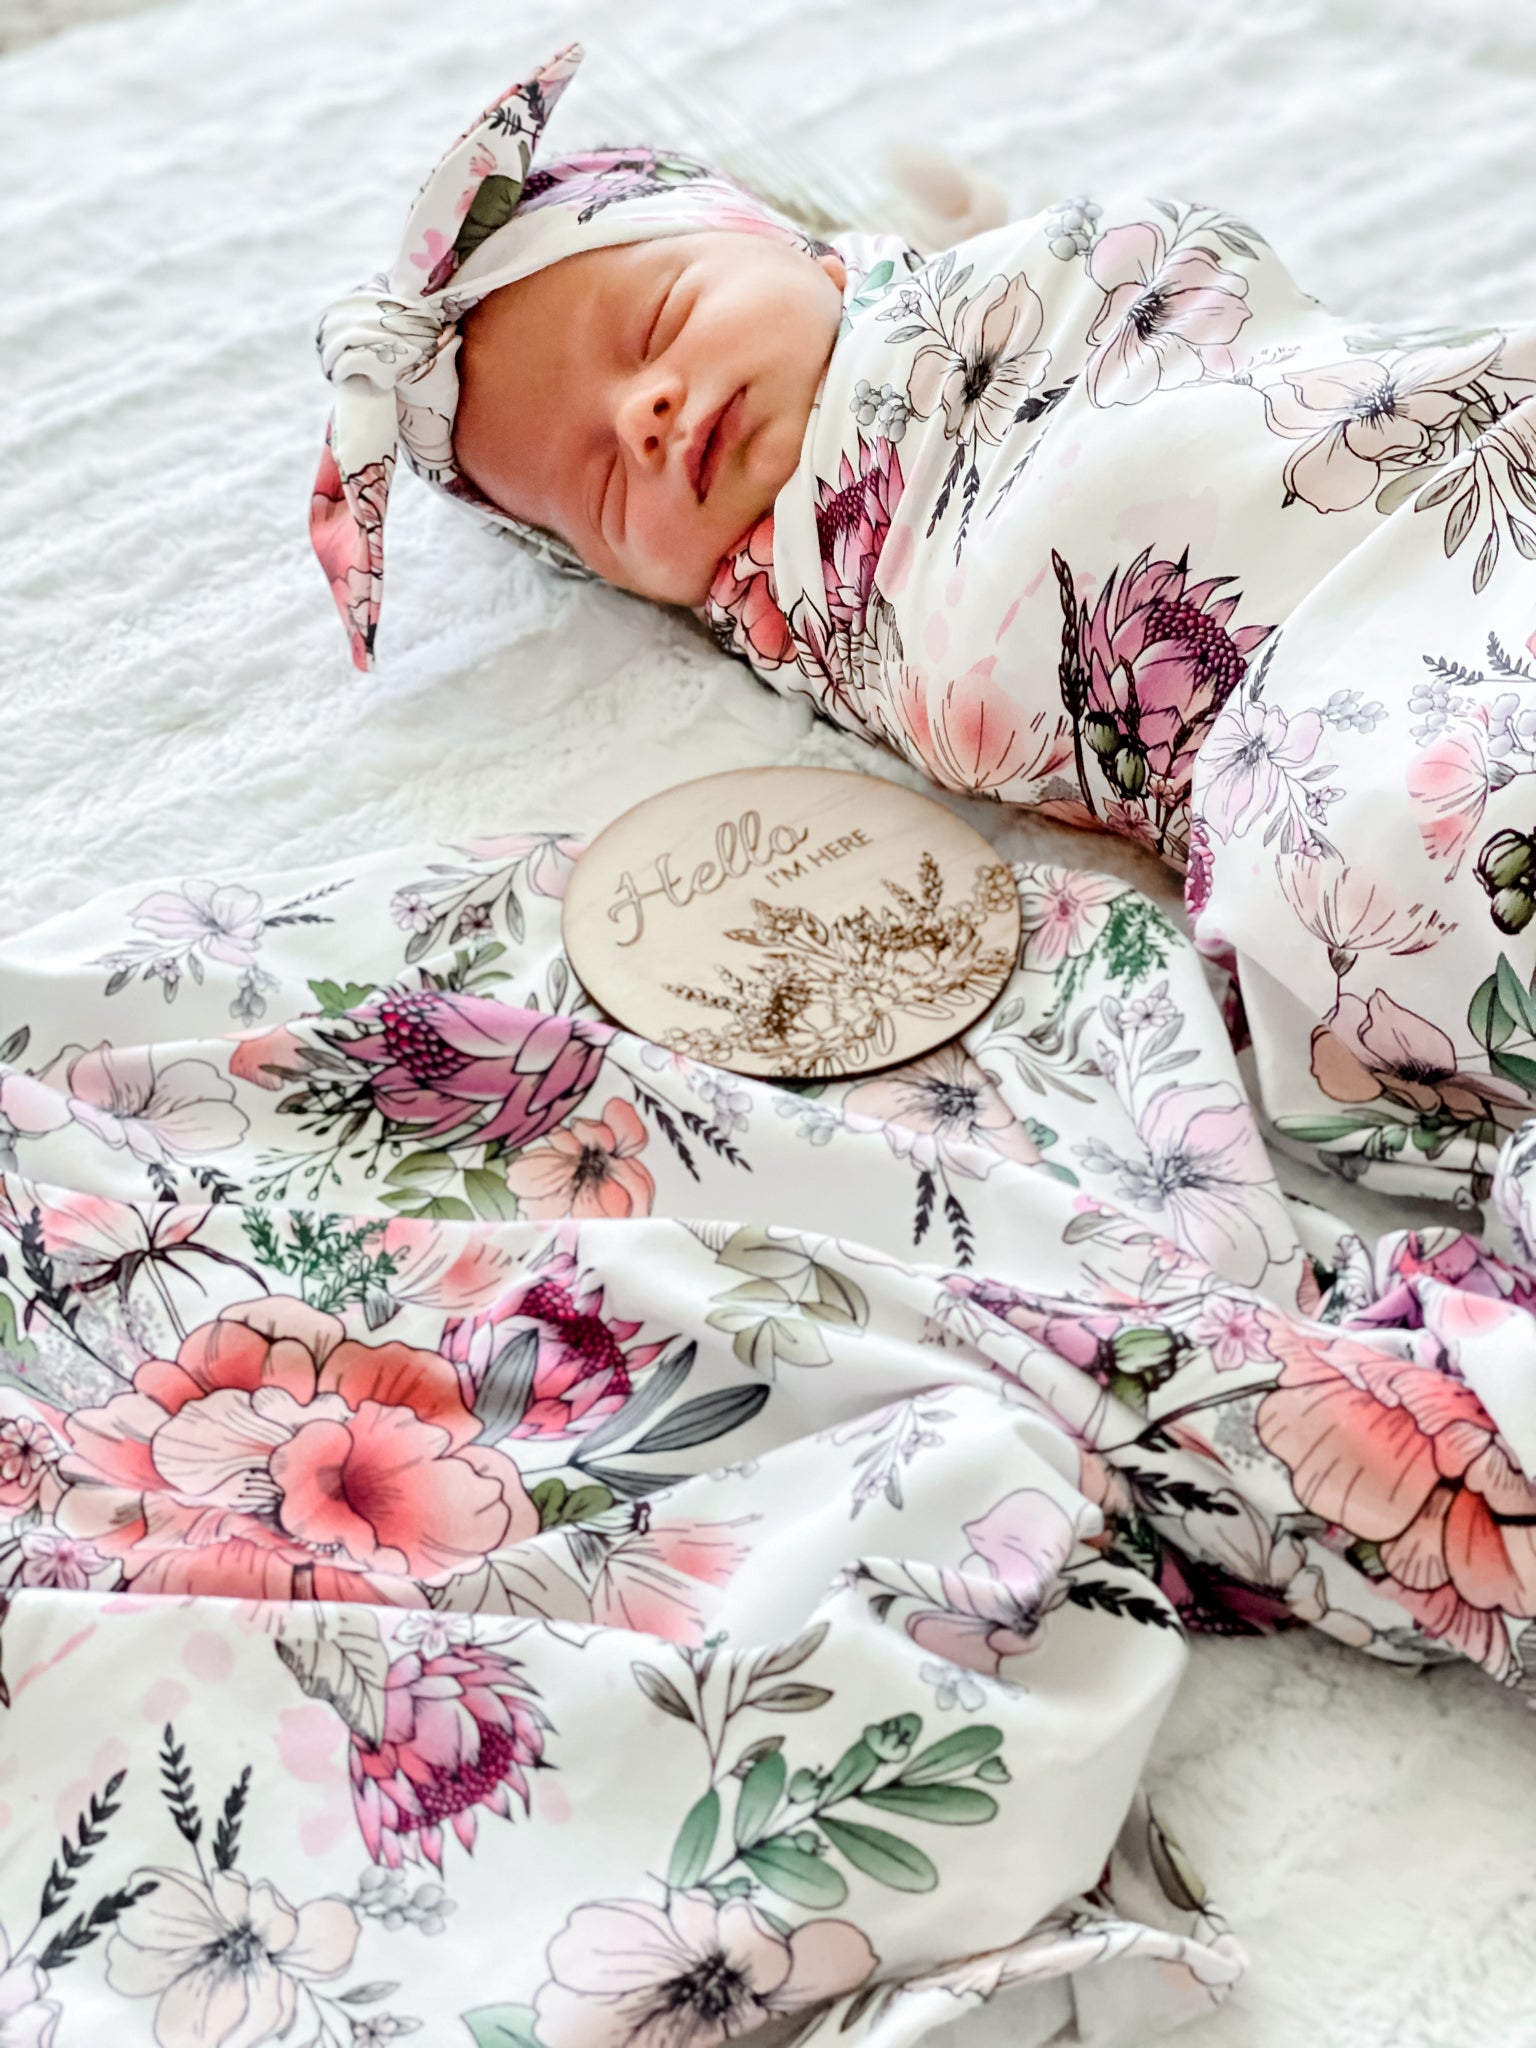 Matilda Jersey Swaddle Wrap & Top Knot